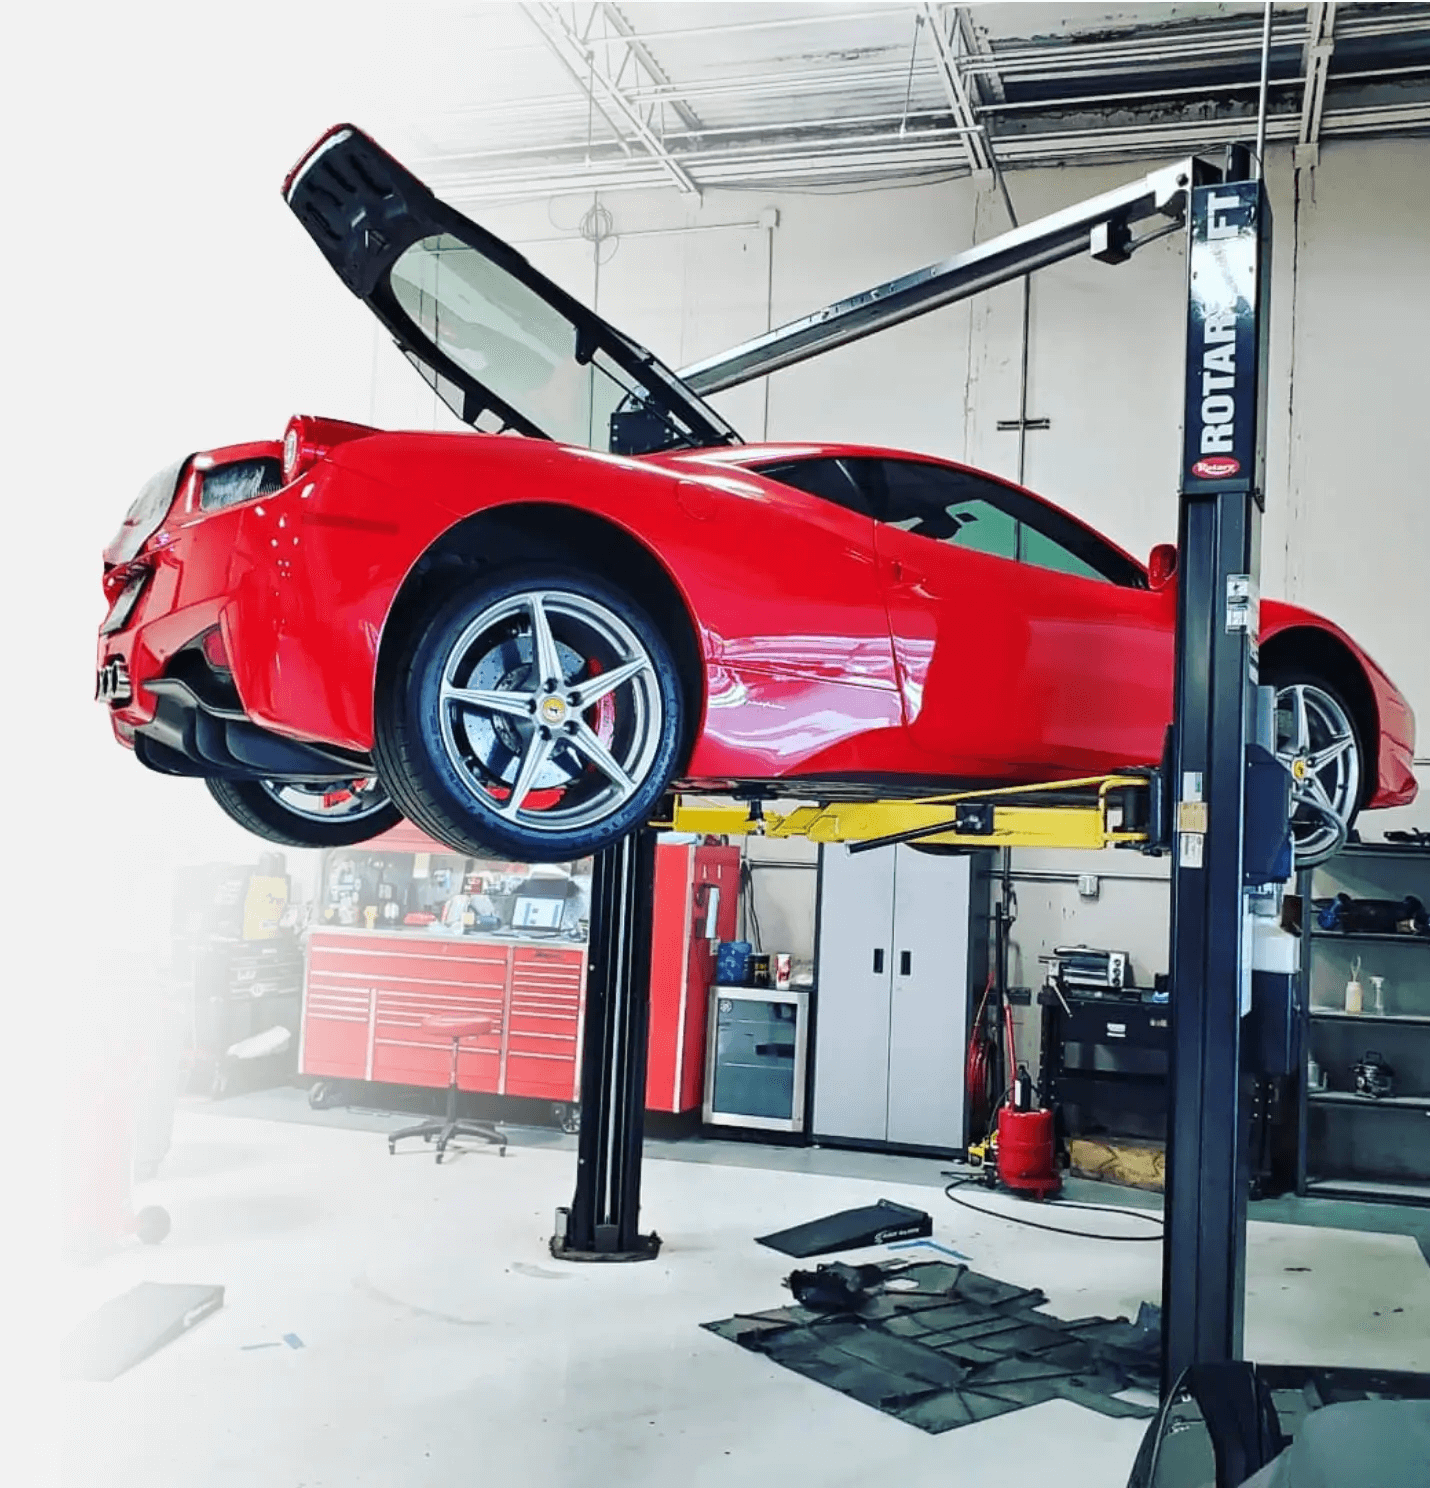 Red Ferrari Car On A Lift In Our Garage